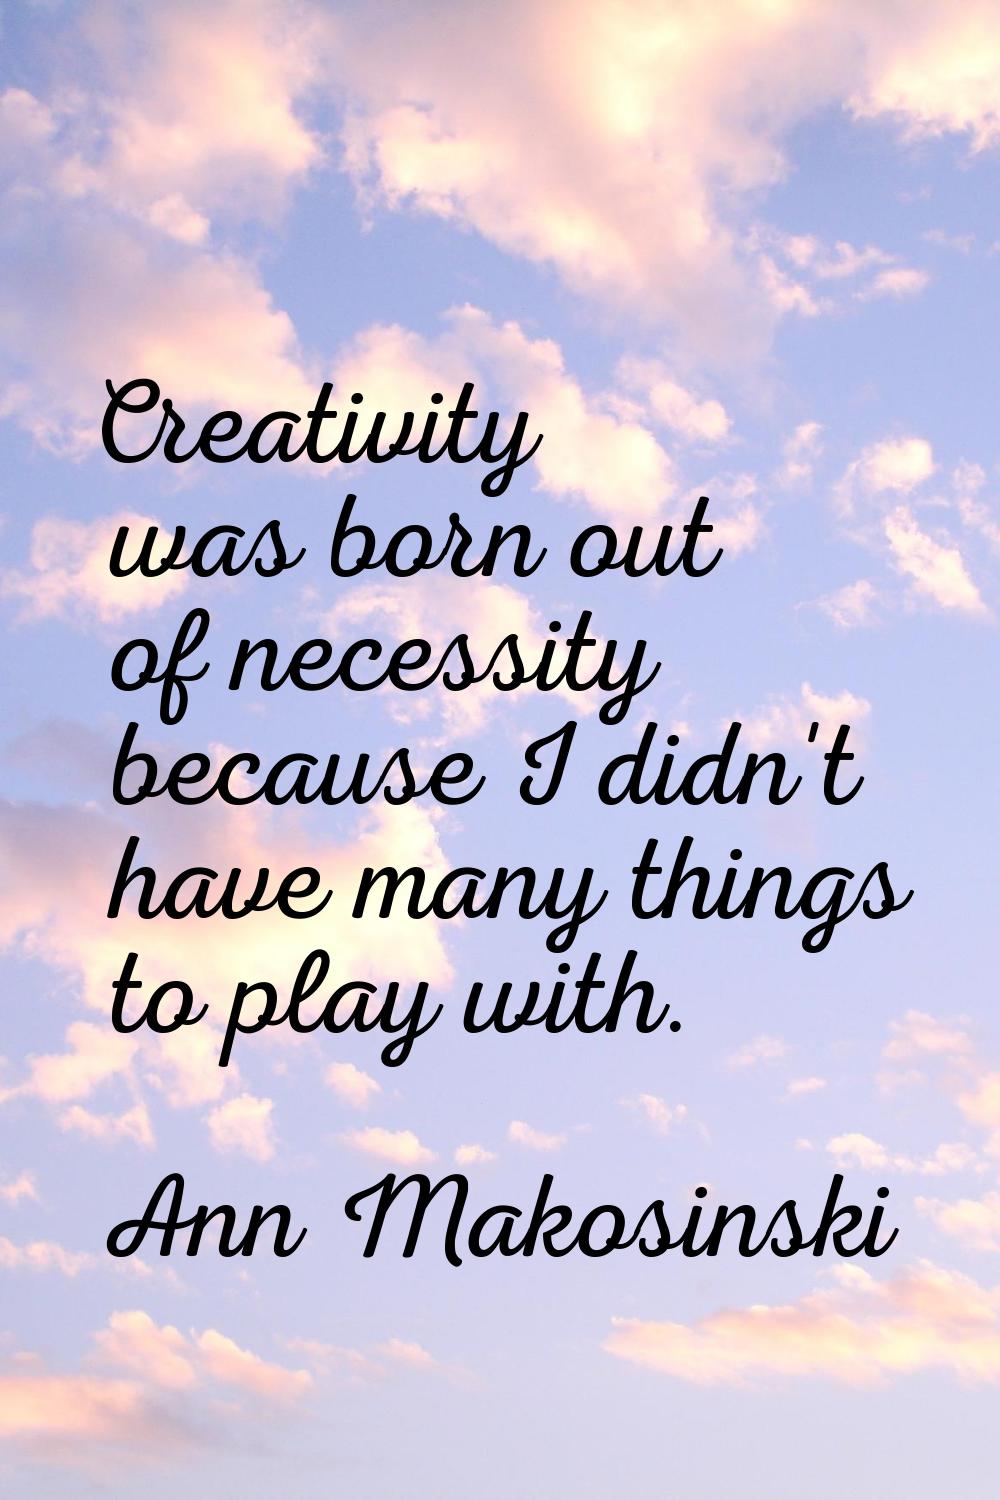 Creativity was born out of necessity because I didn't have many things to play with.